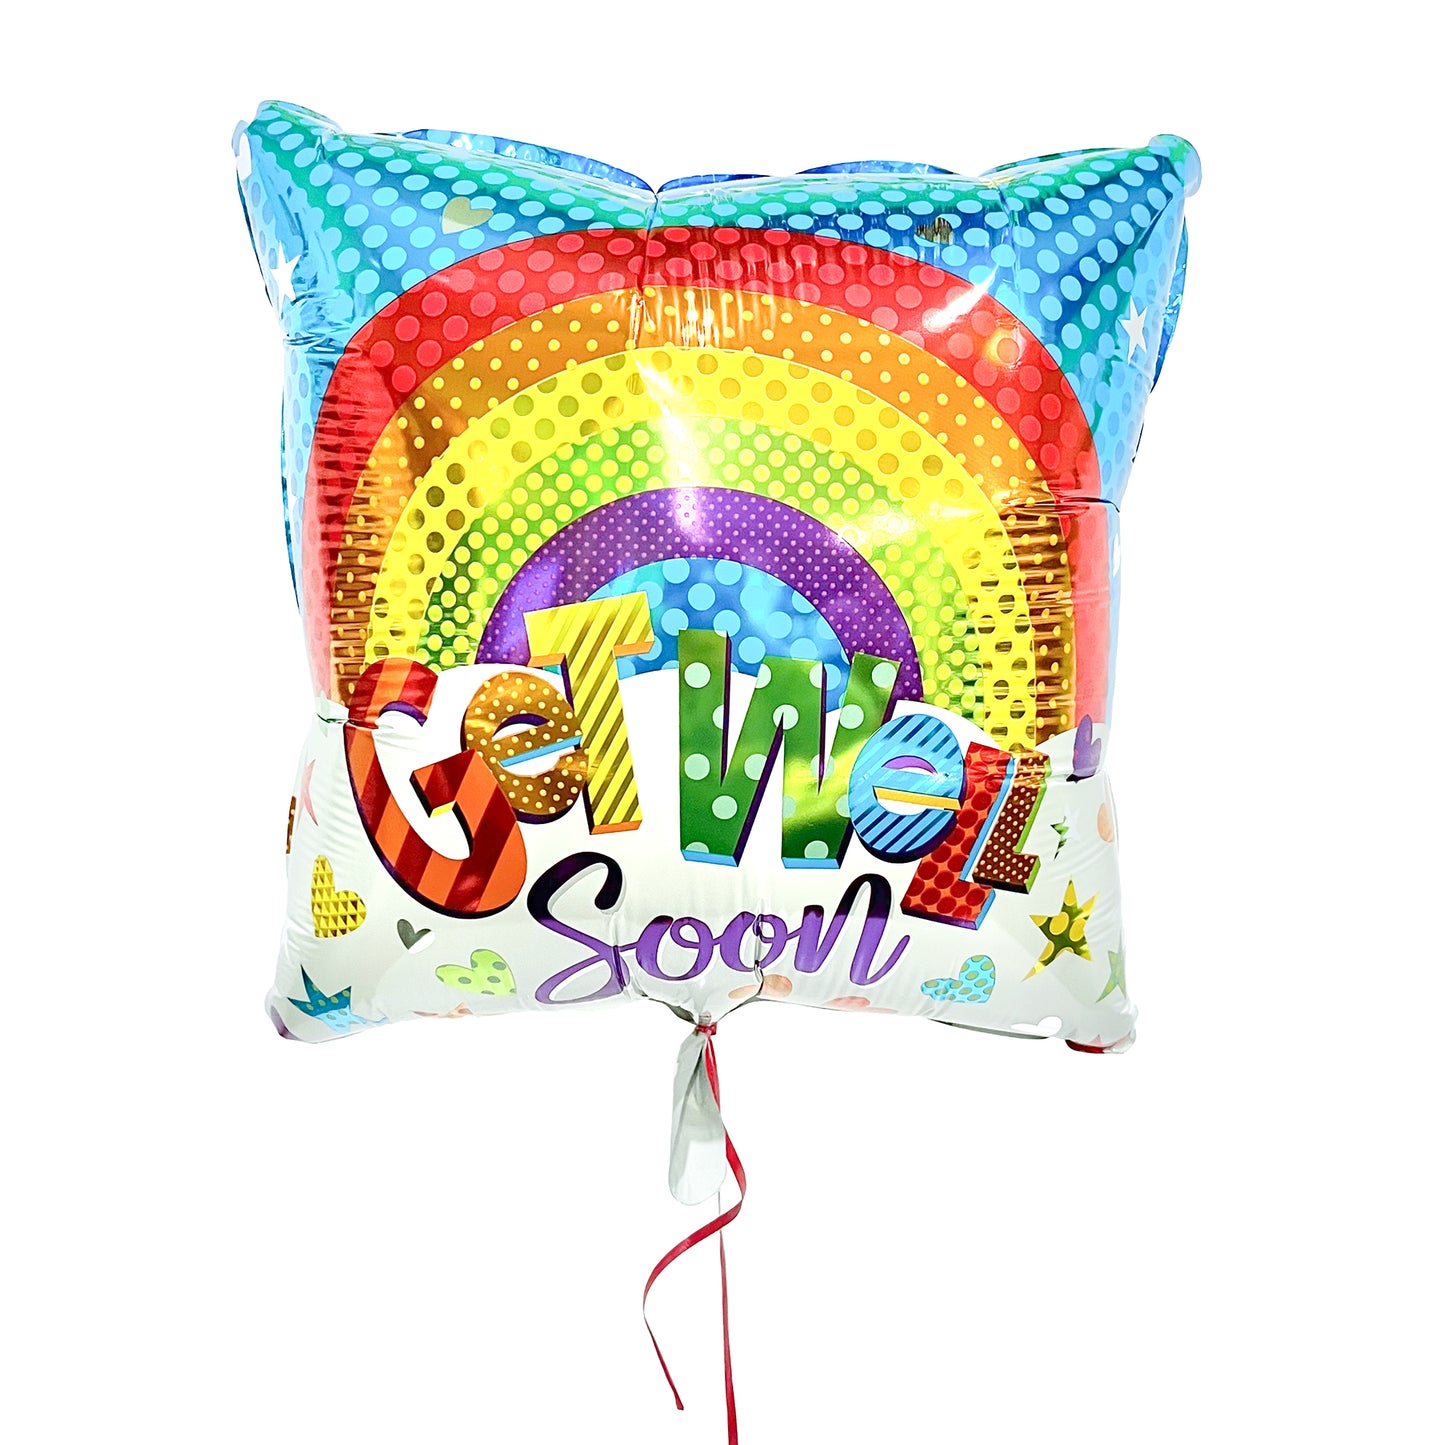 Get well soon blue square mylar balloon with rainbow